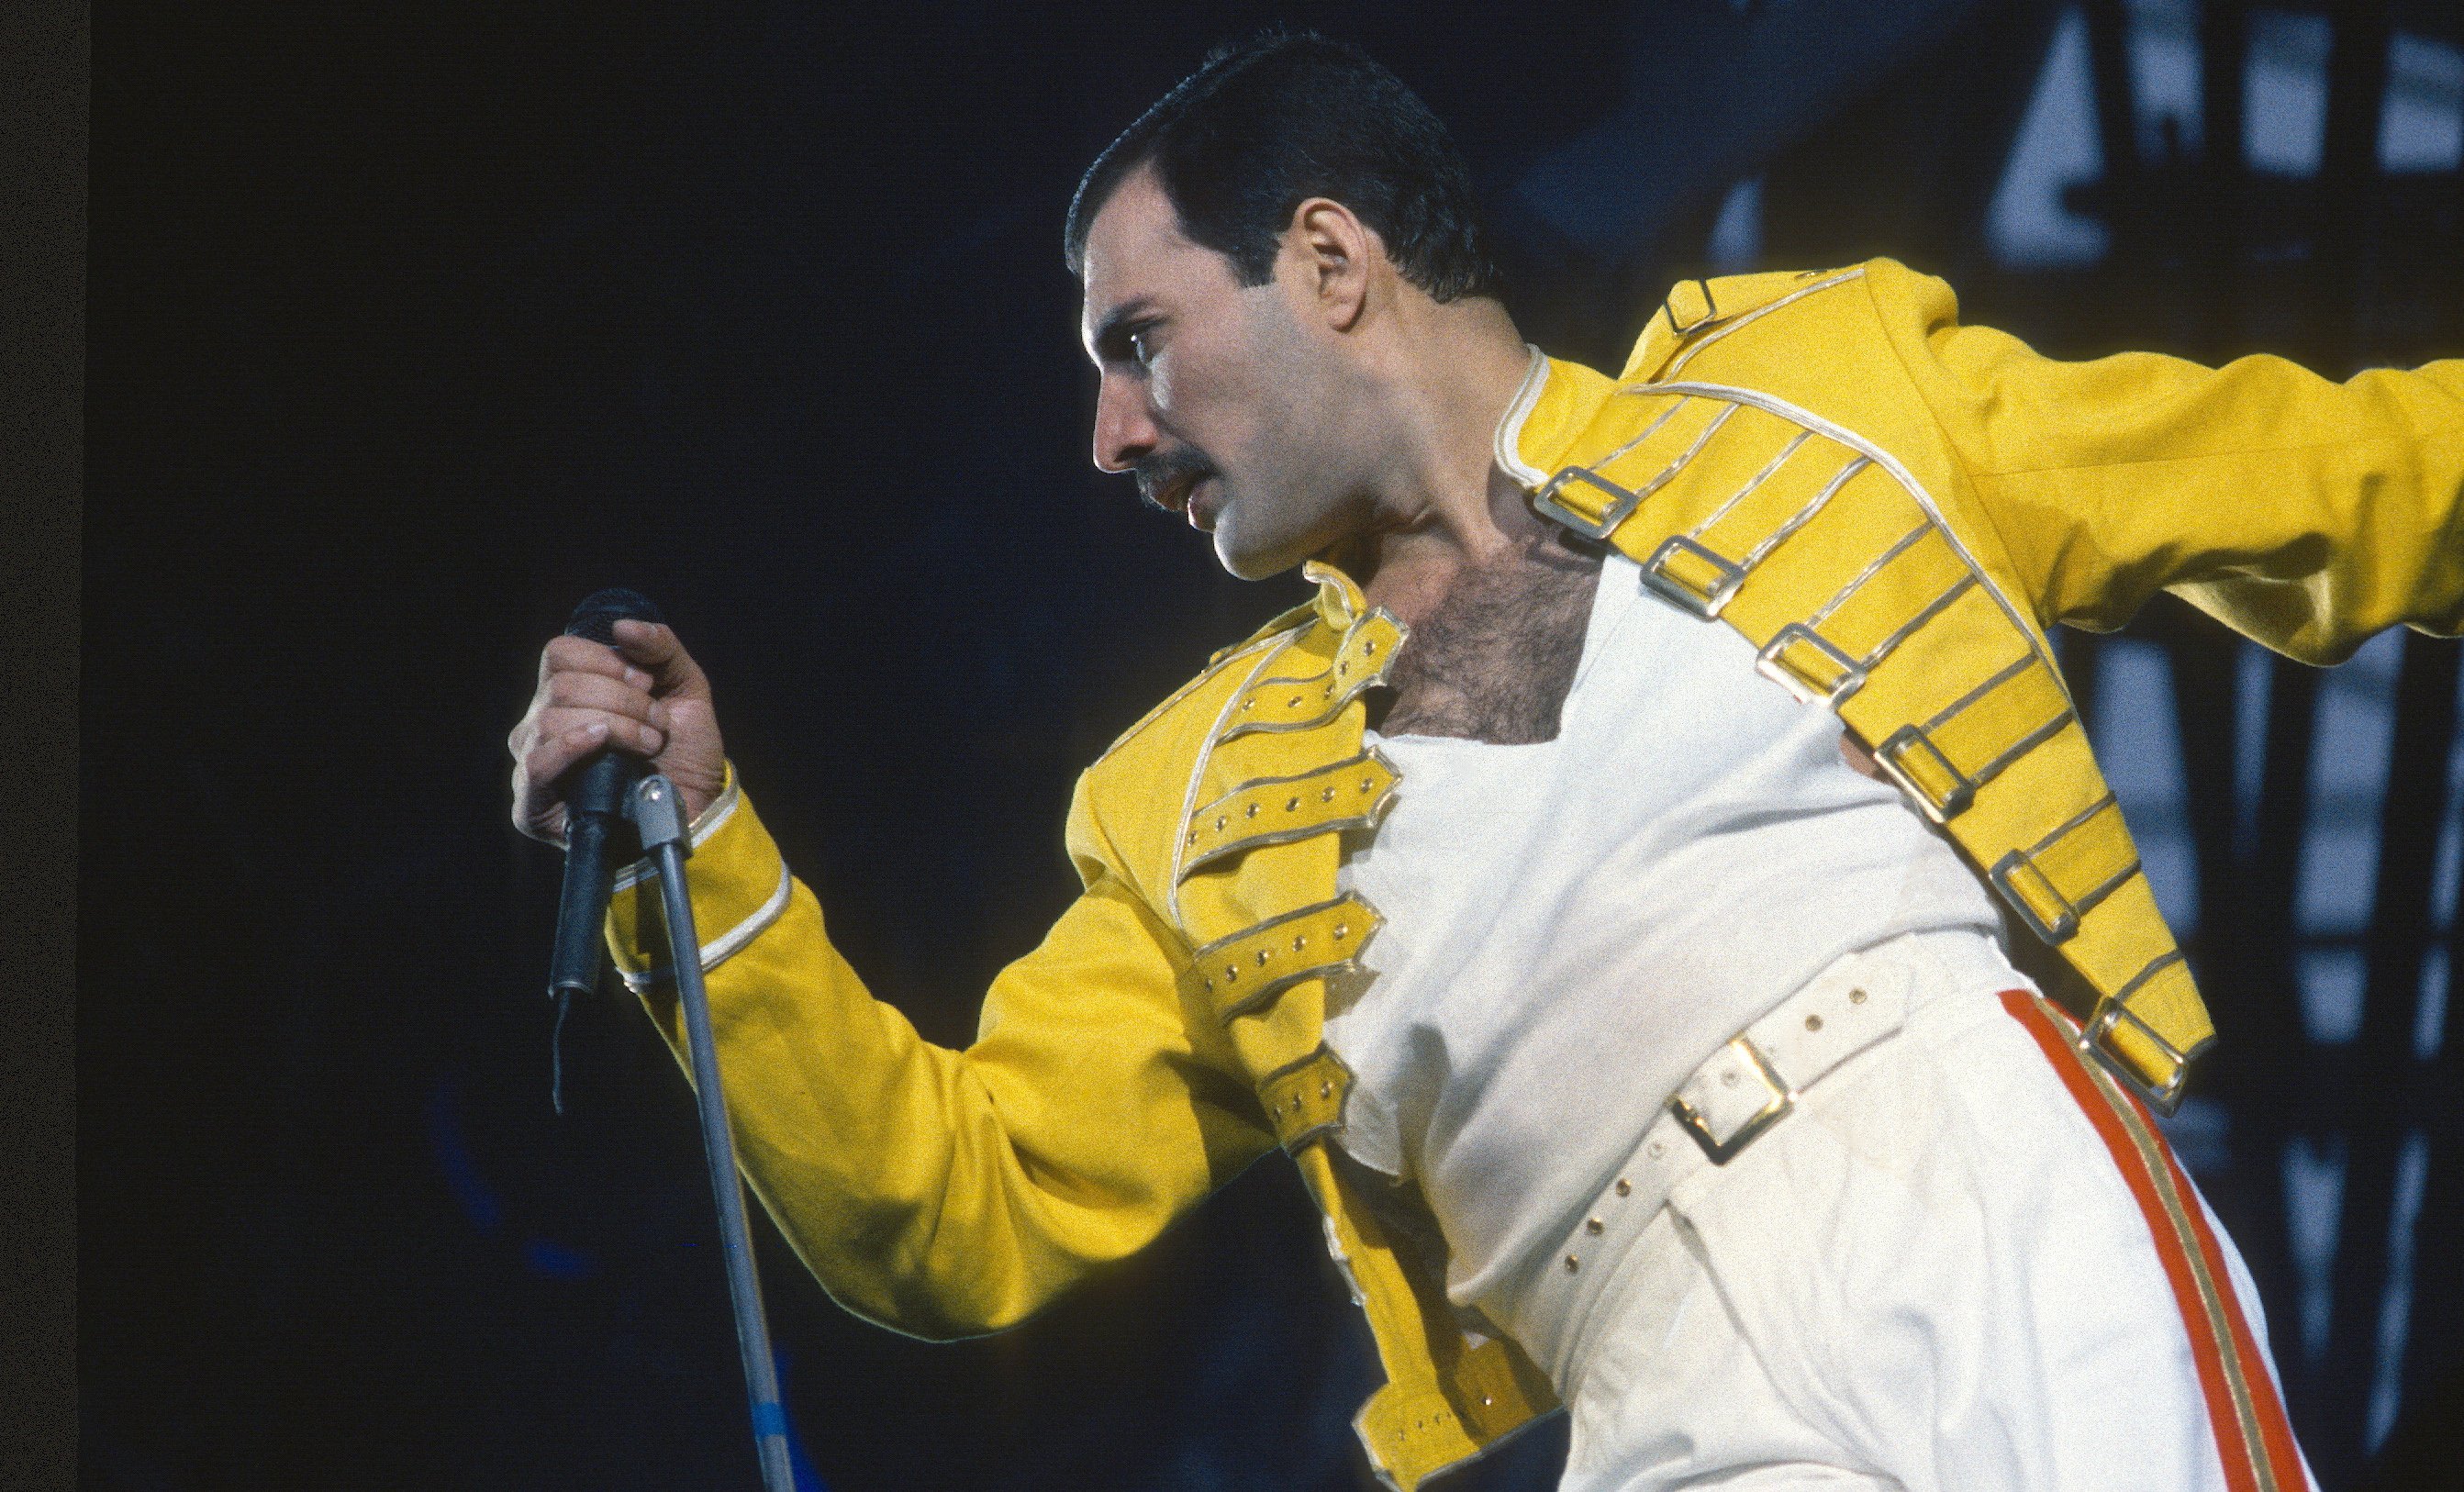 Freddie Mercury performing at a concert in London, England. | Photo: Getty Images